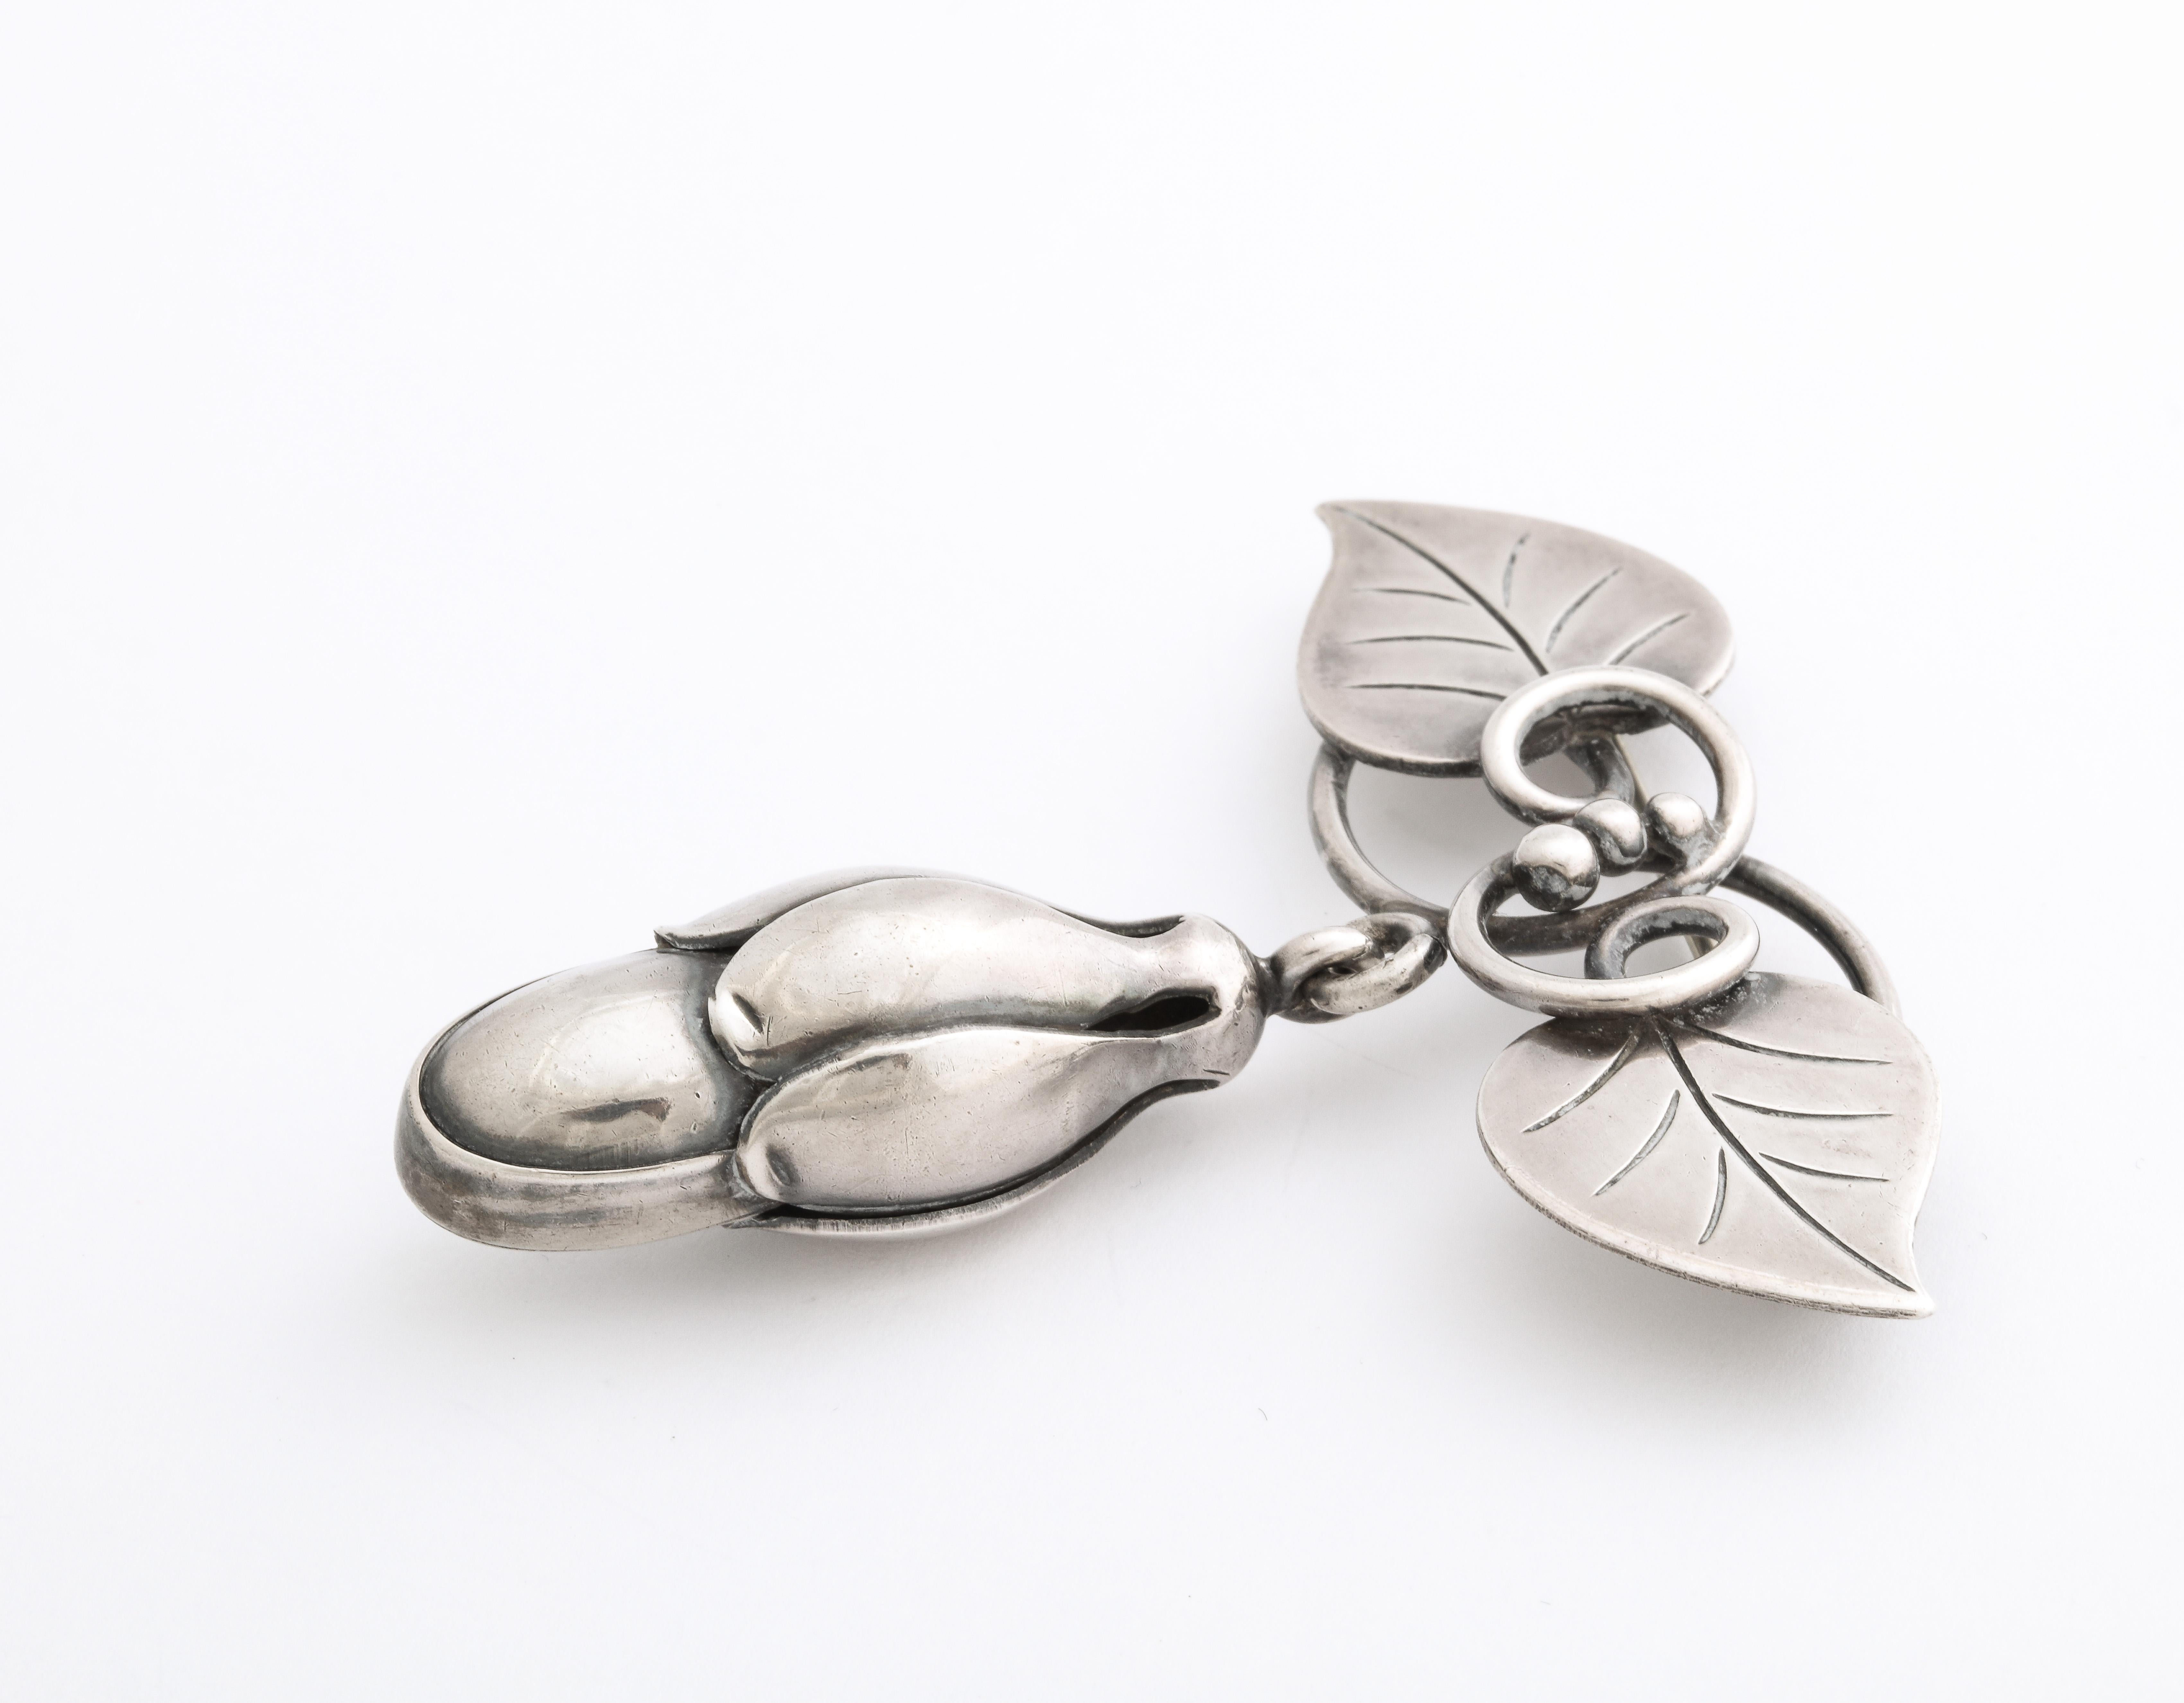 American Modernist Silver Brooch by La Paglia, 1940 In Excellent Condition For Sale In Stamford, CT